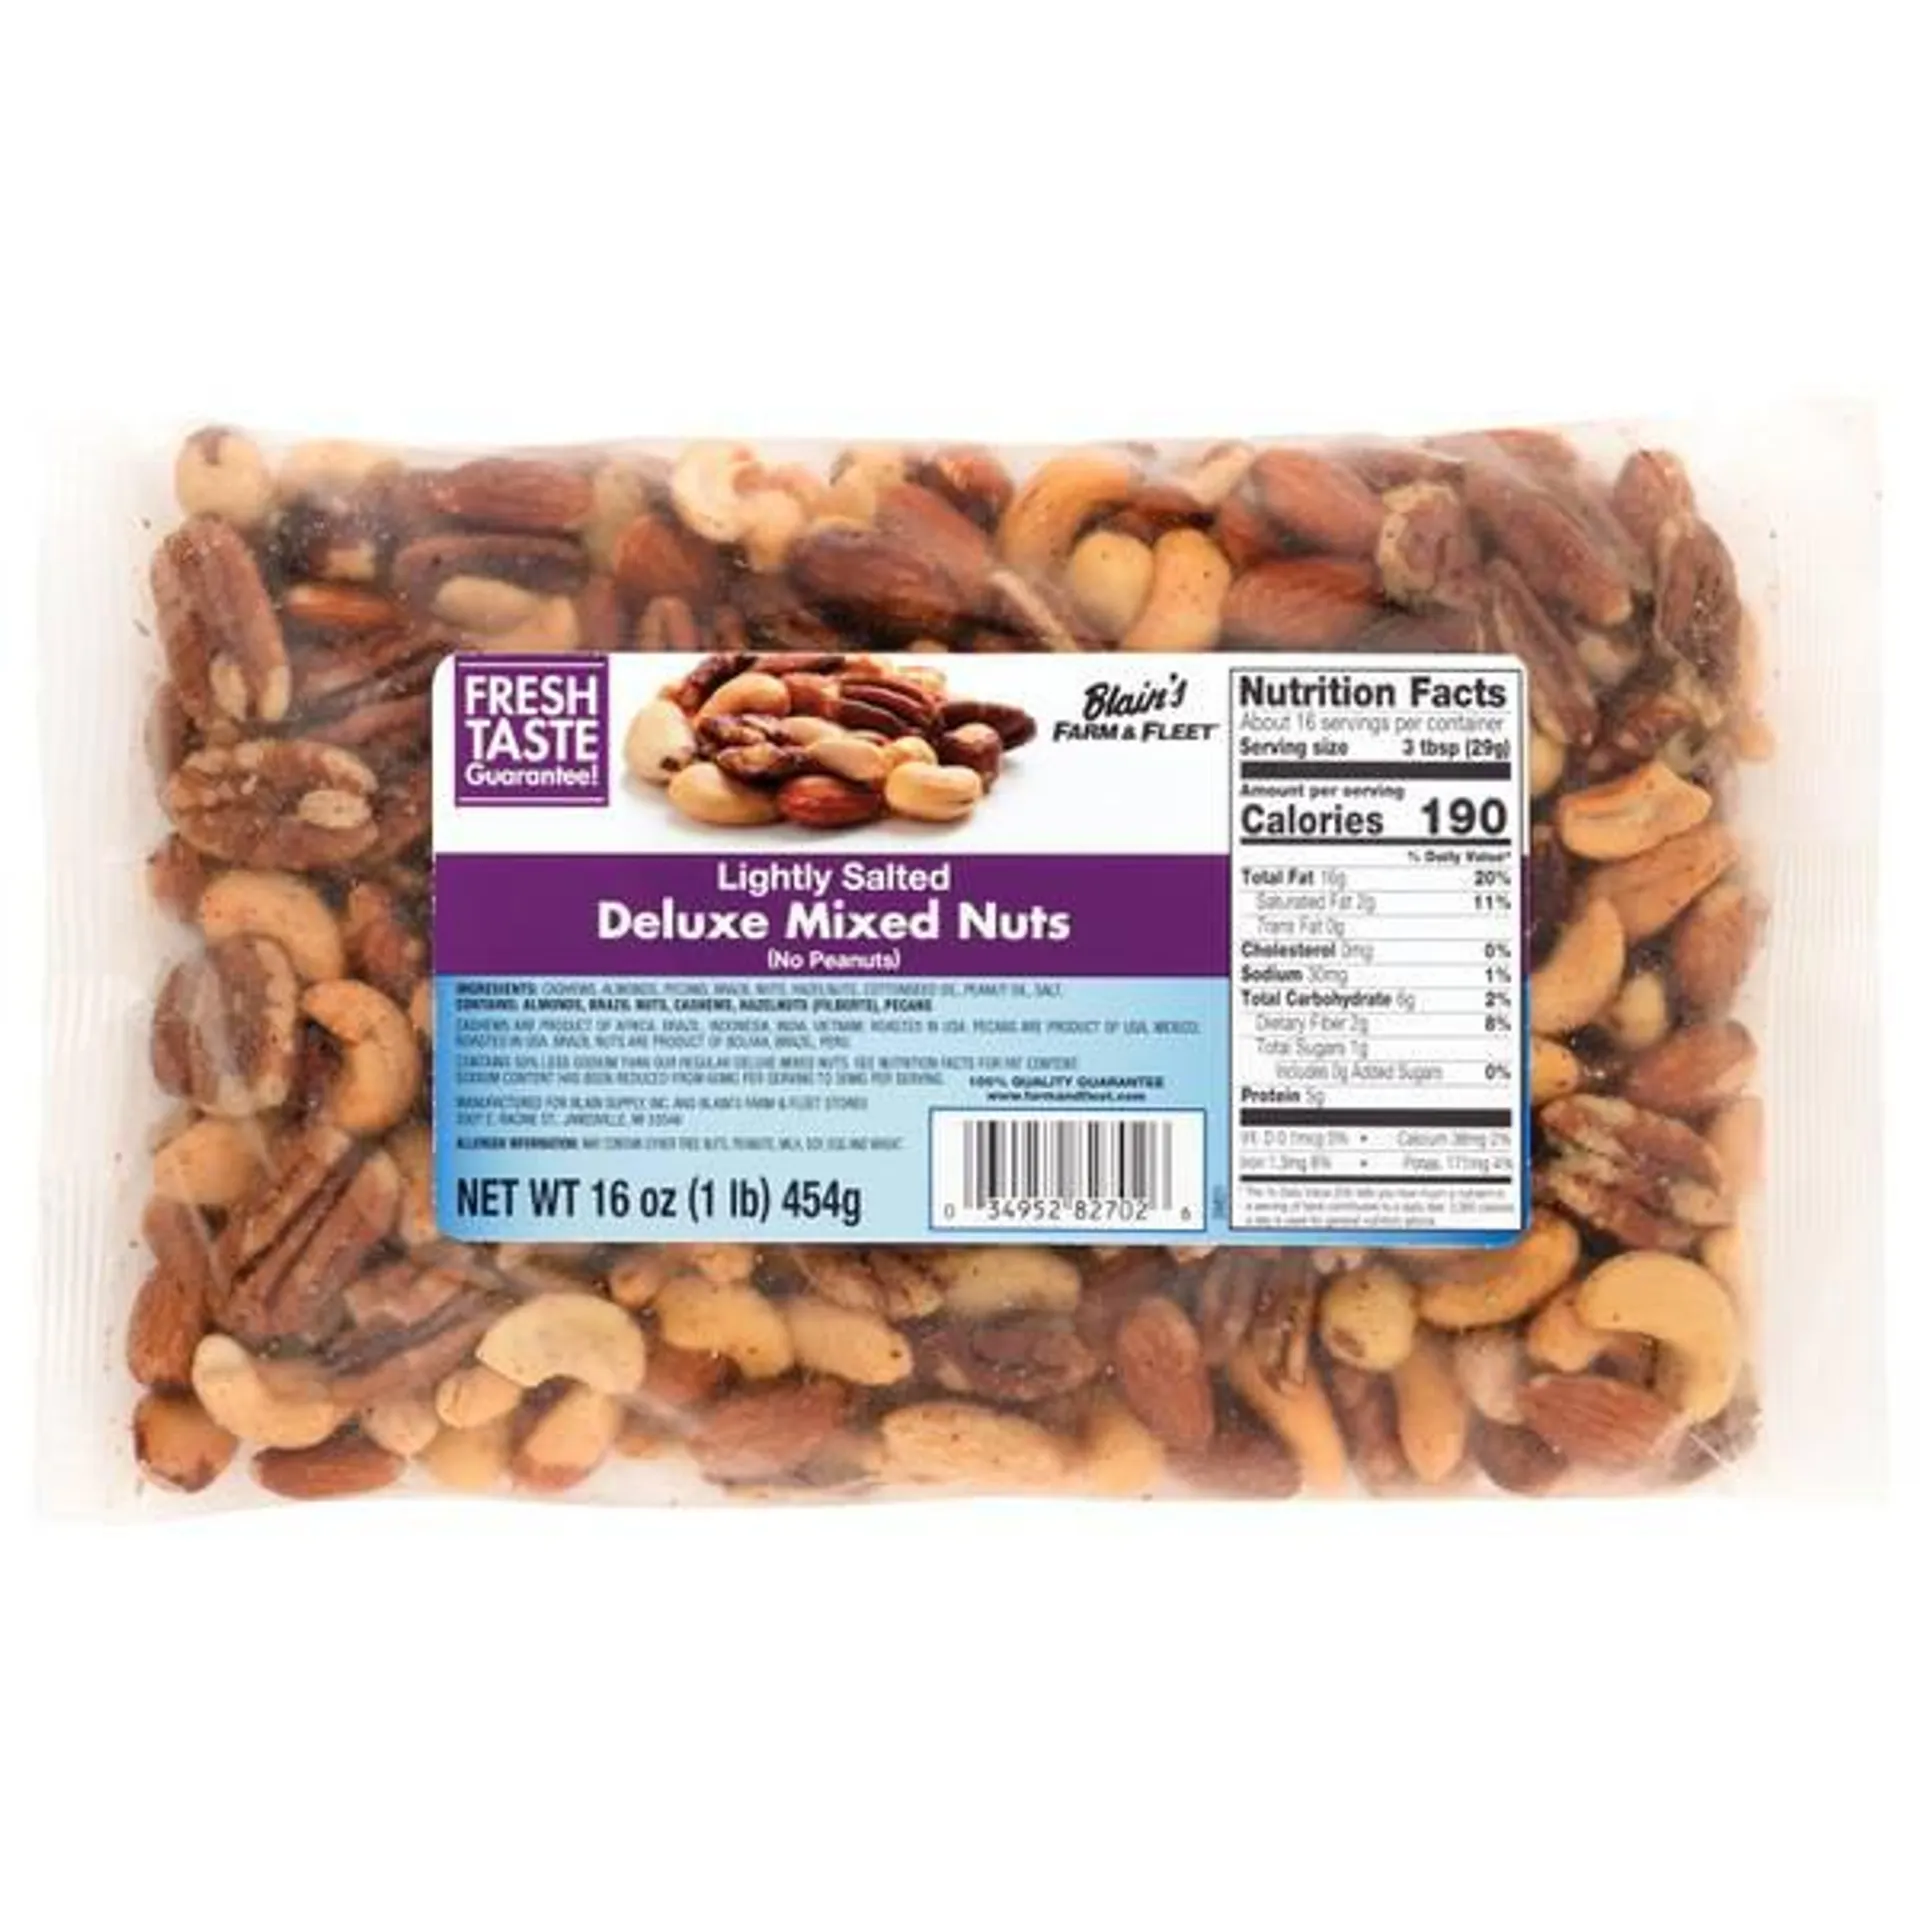 16 oz Lightly Salted Deluxe Mixed Nuts (No Peanuts)